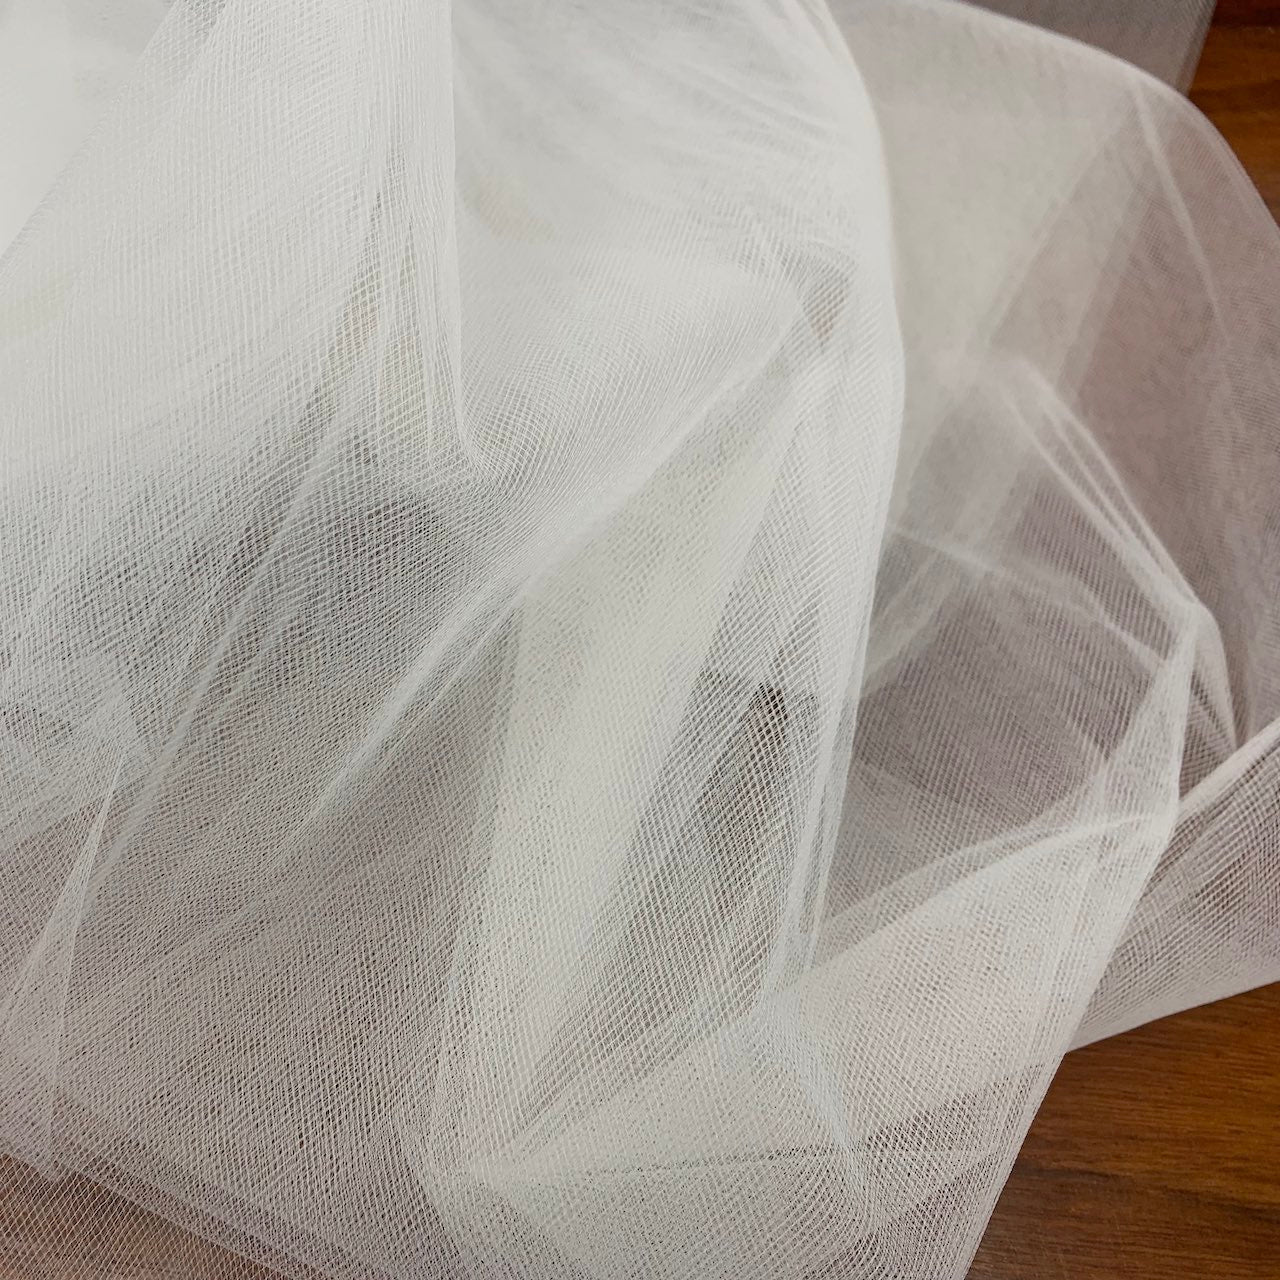 Bridal Tulle Fabric For Veil